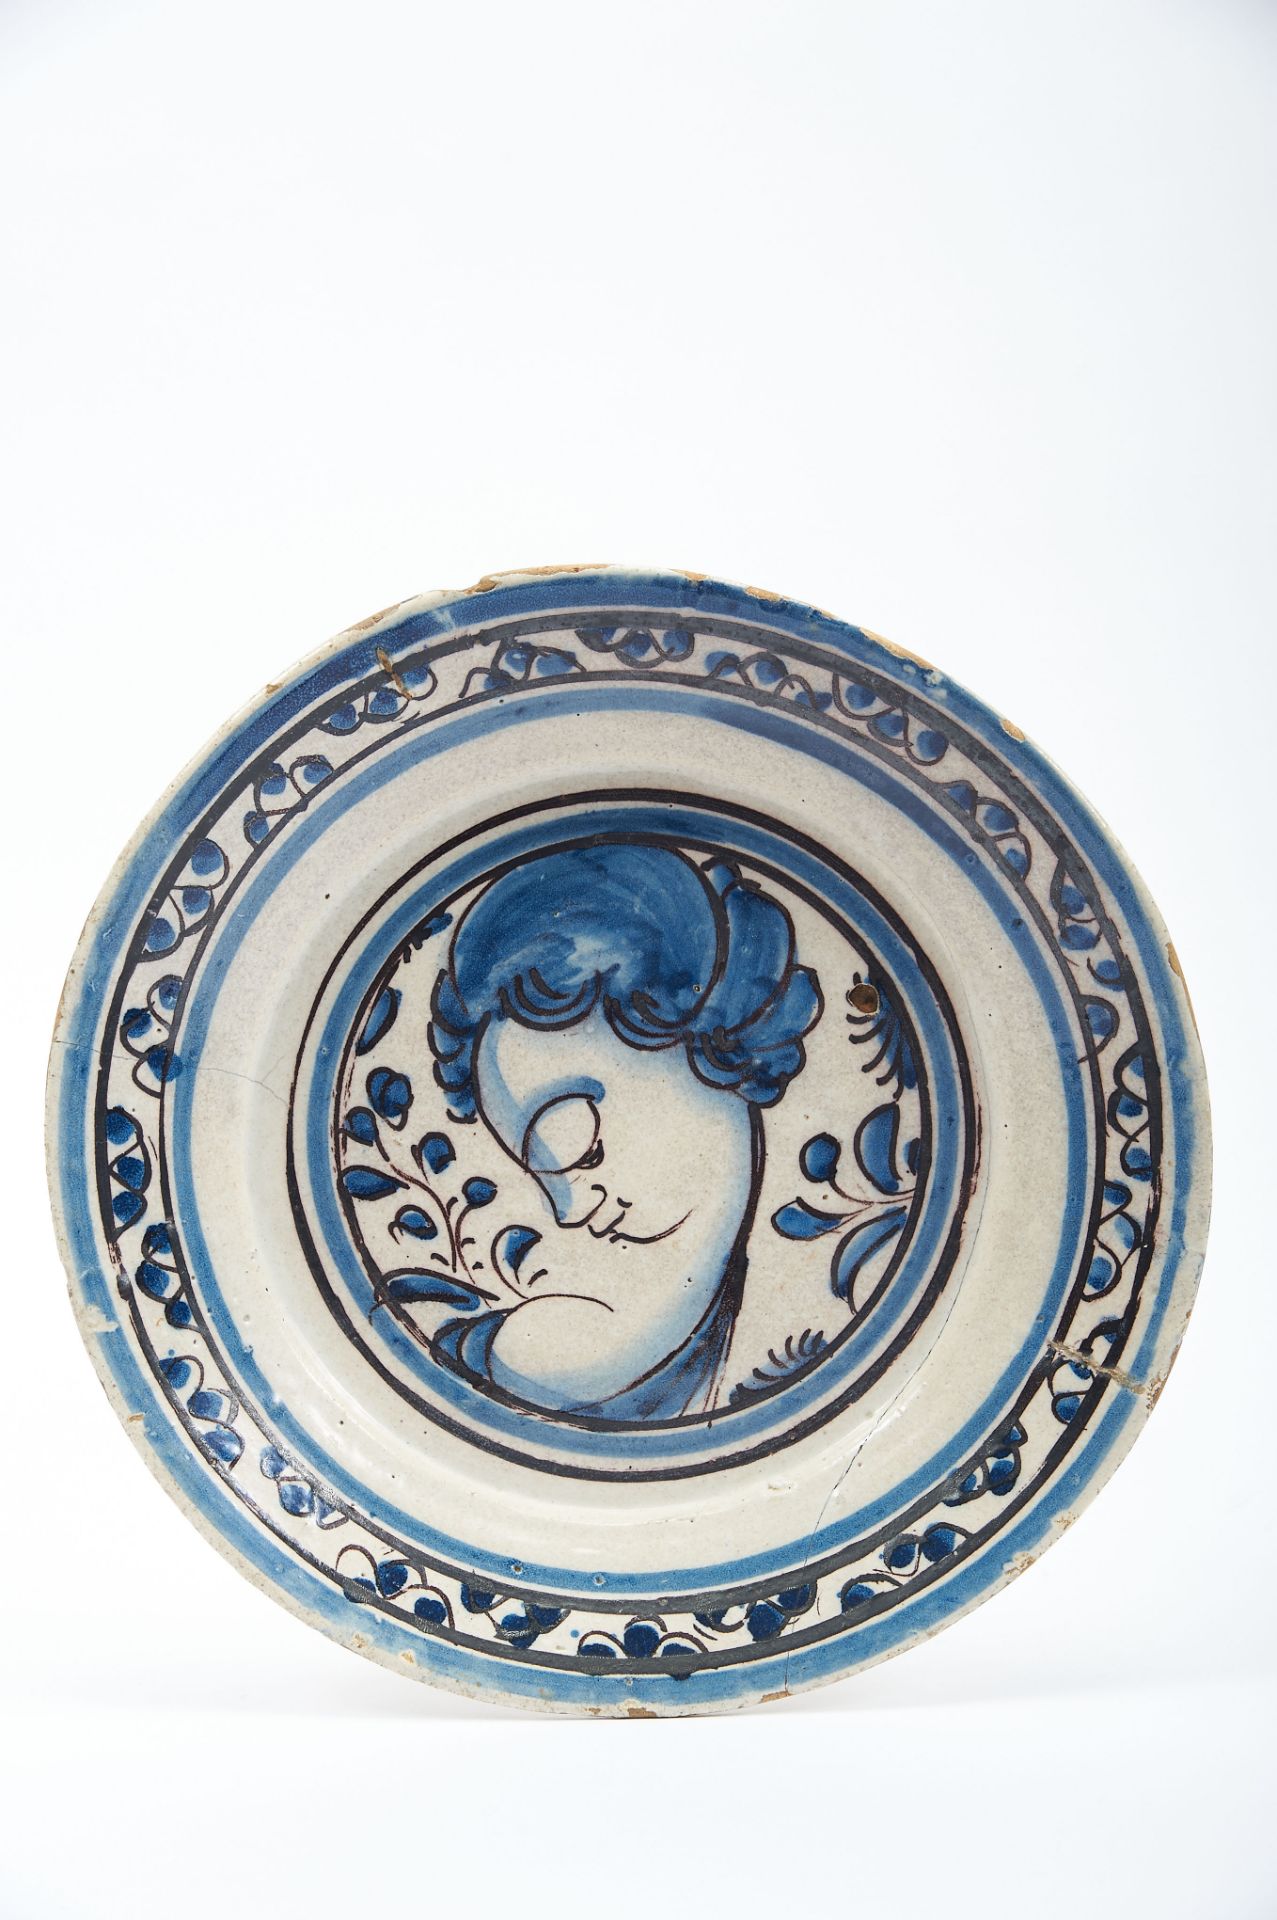 A Dish, faience, blue and vinous decoration known as "Contas", "Female bust", Portuguese, 17th C. (